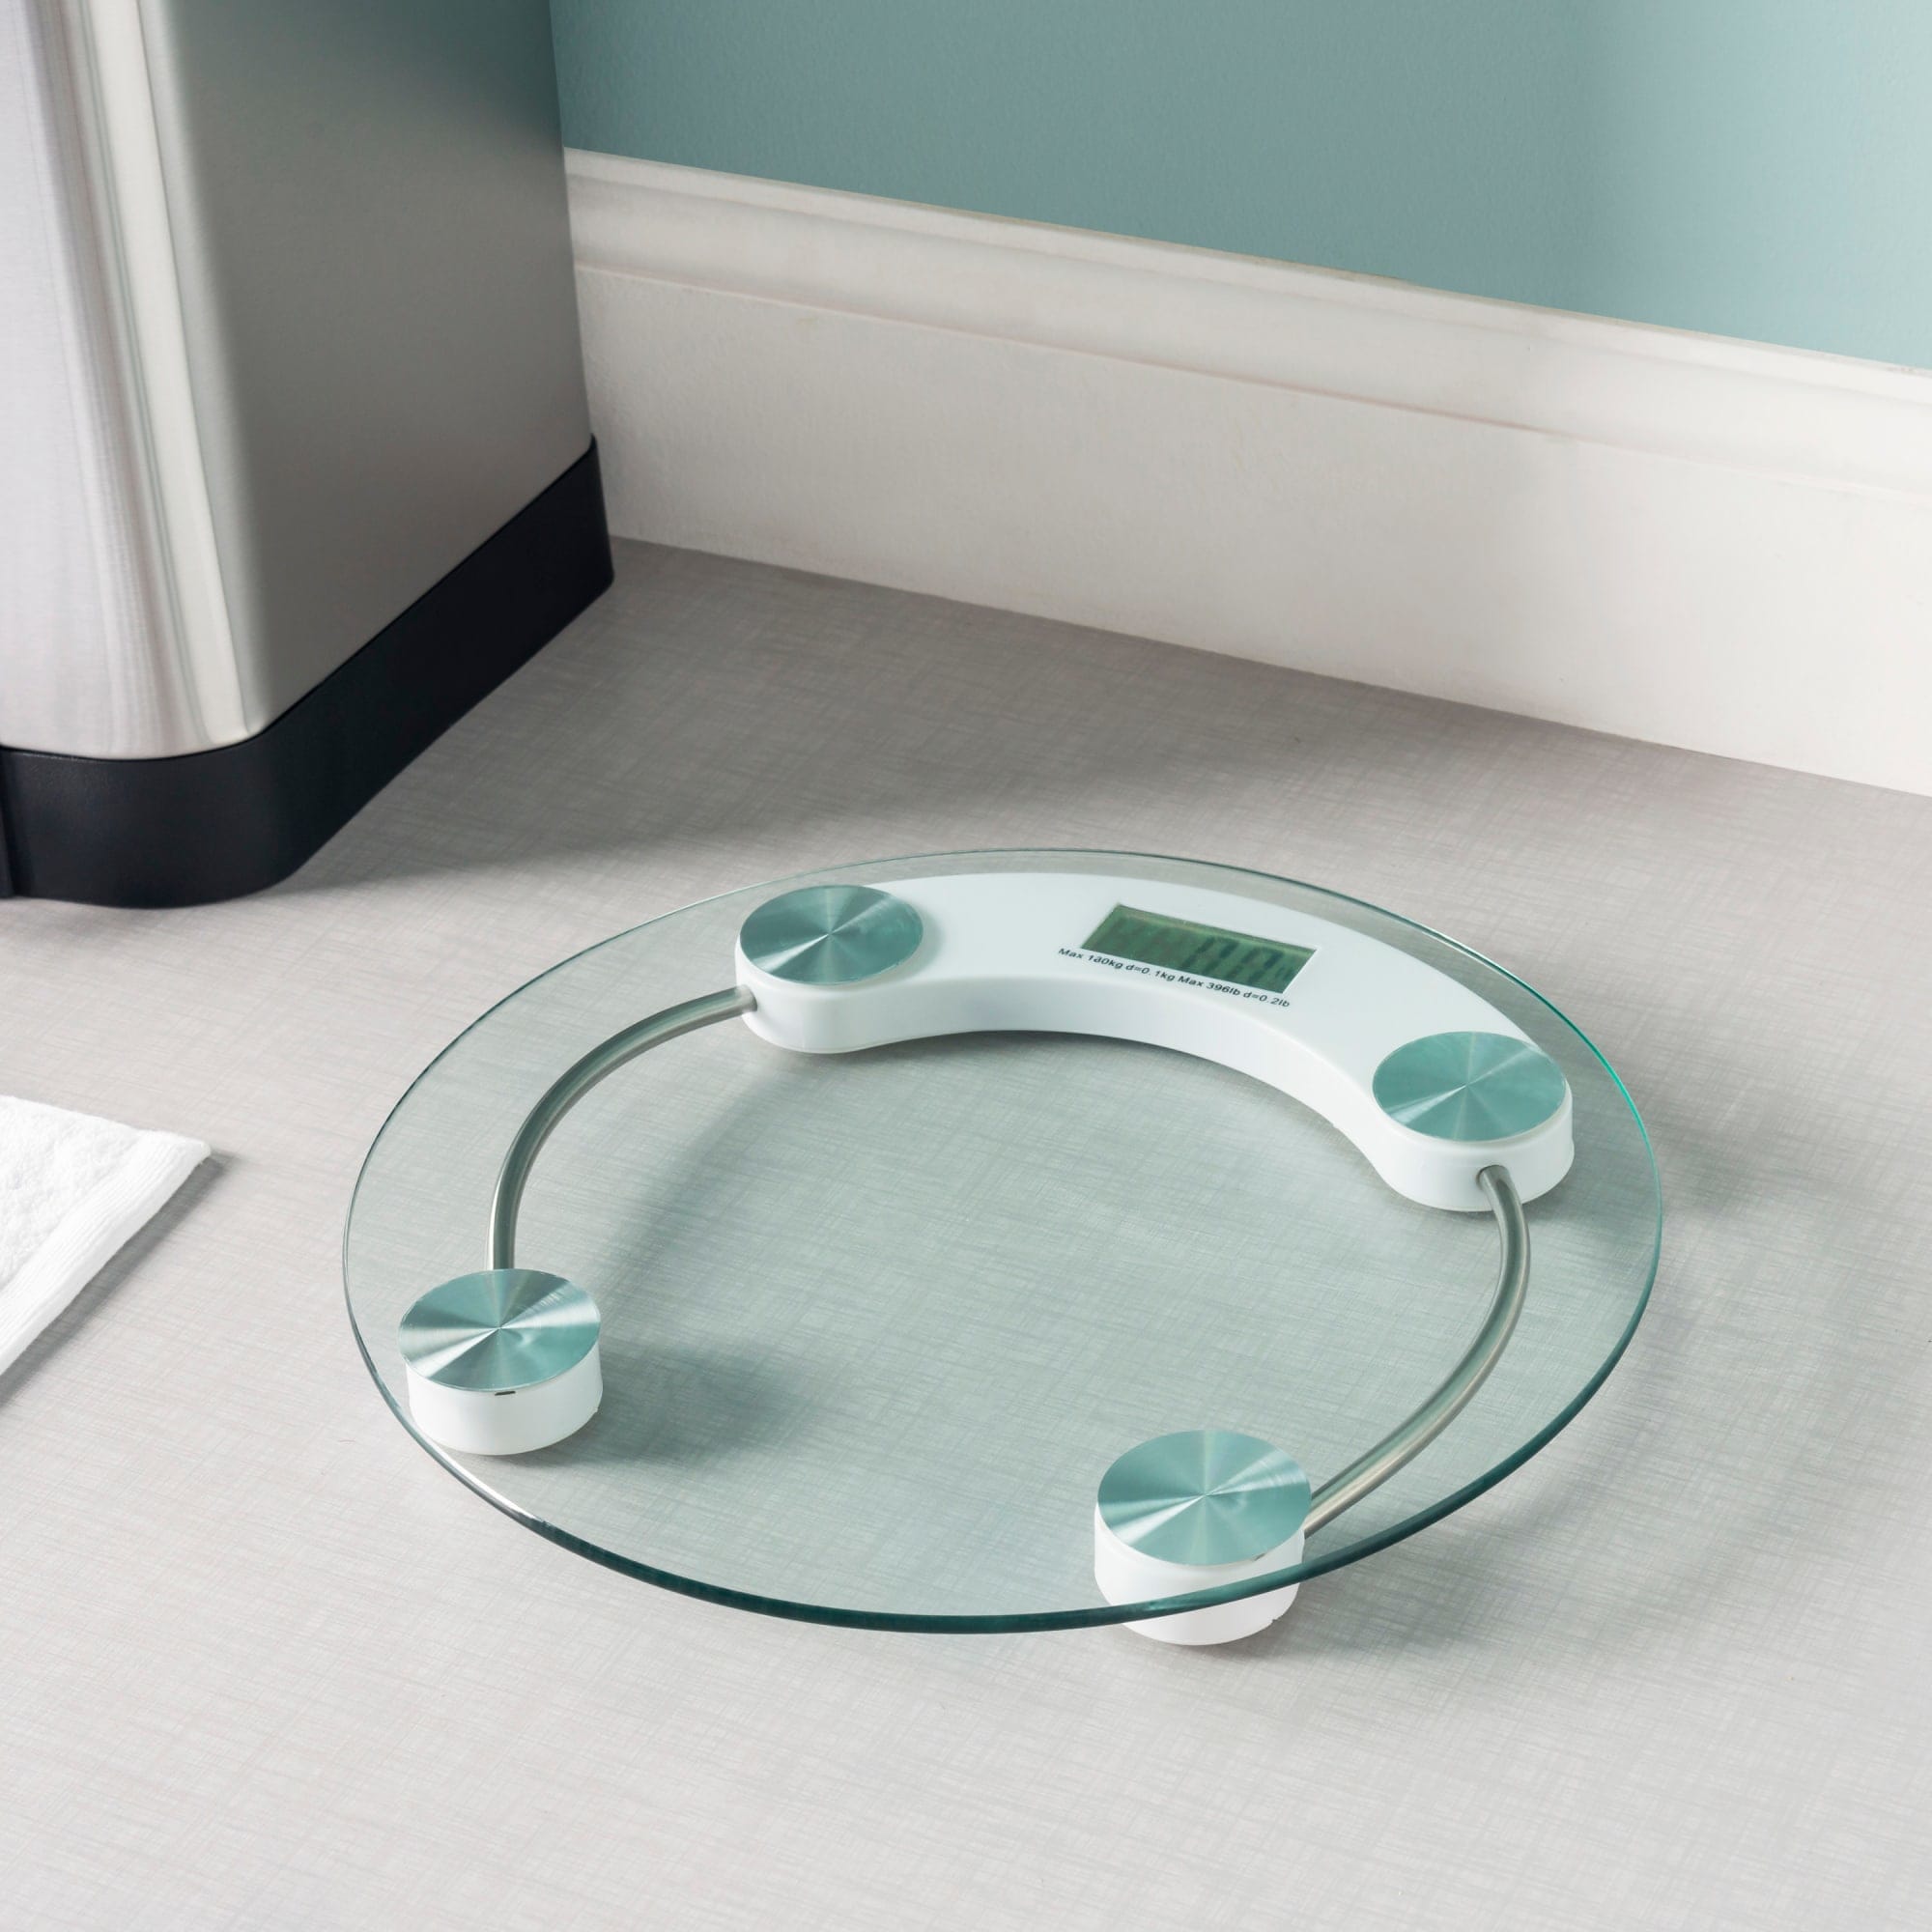 Home Basics Round Glass Bathroom Scale $10.00 EACH, CASE PACK OF 8